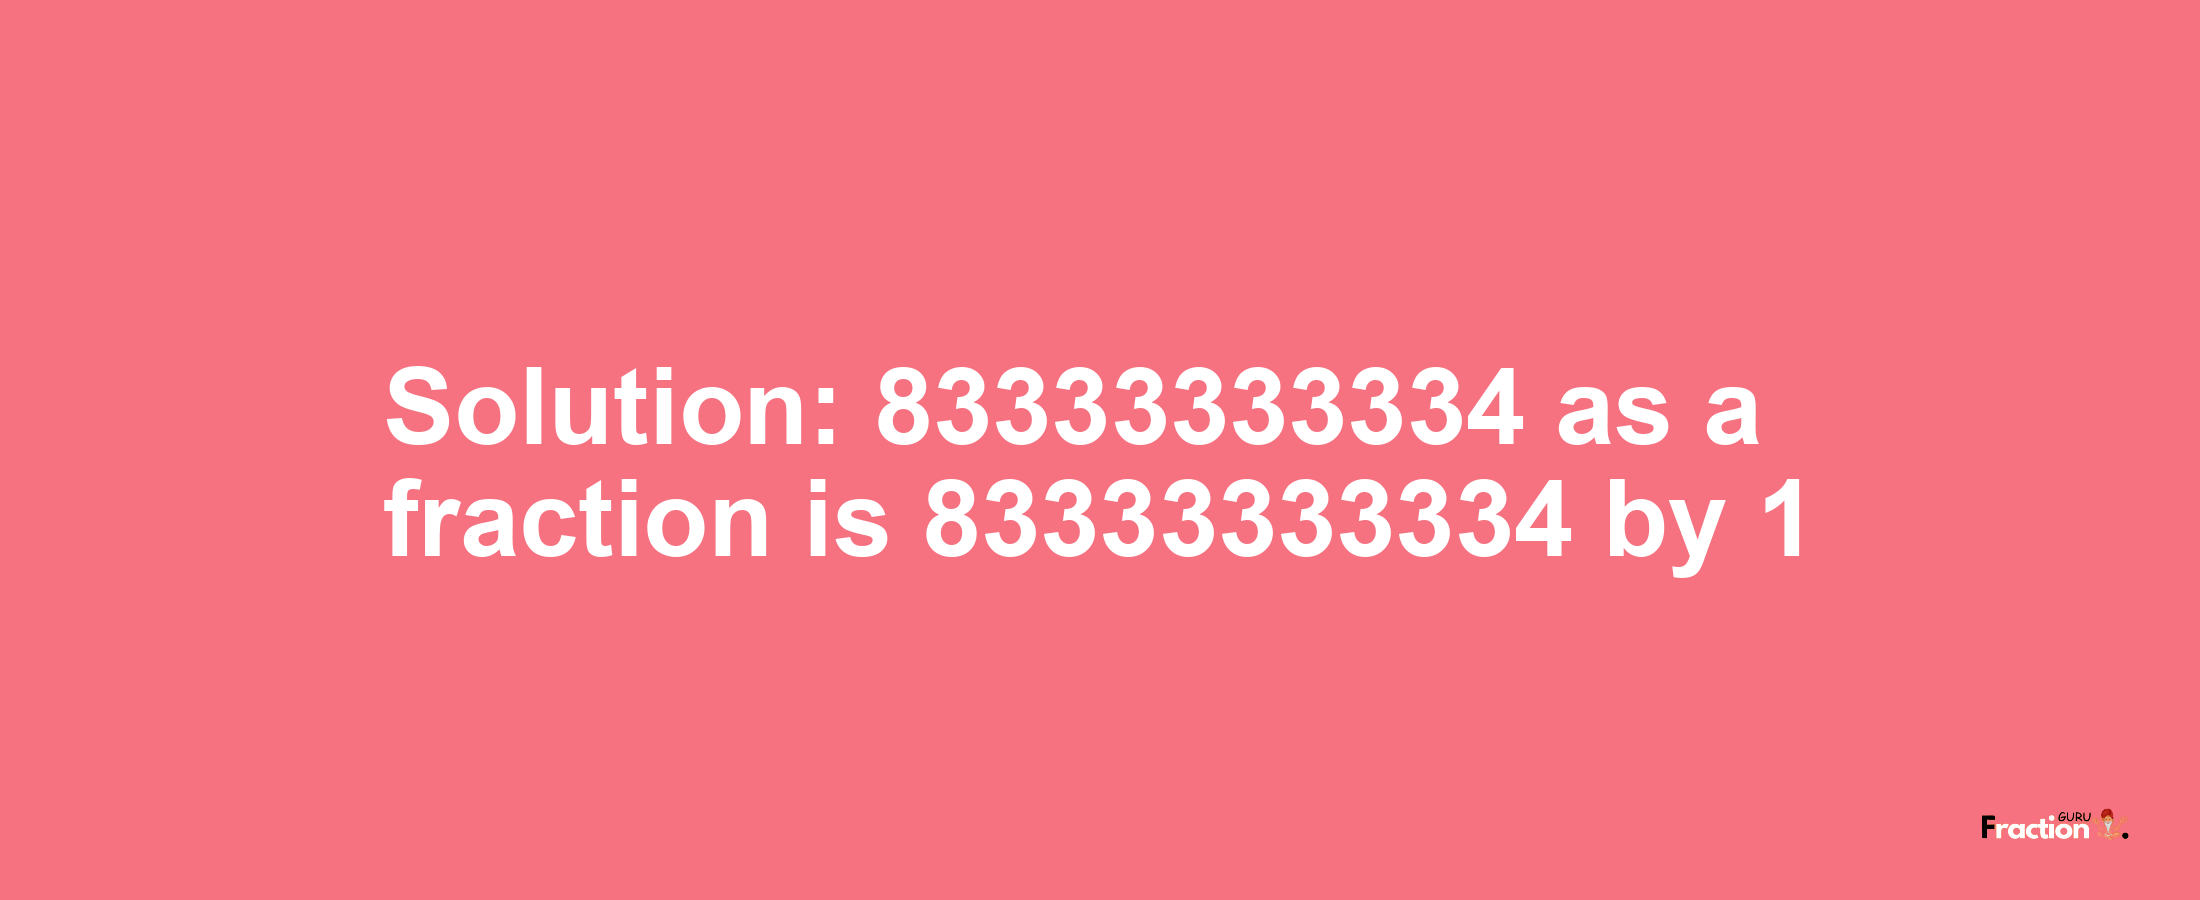 Solution:83333333334 as a fraction is 83333333334/1